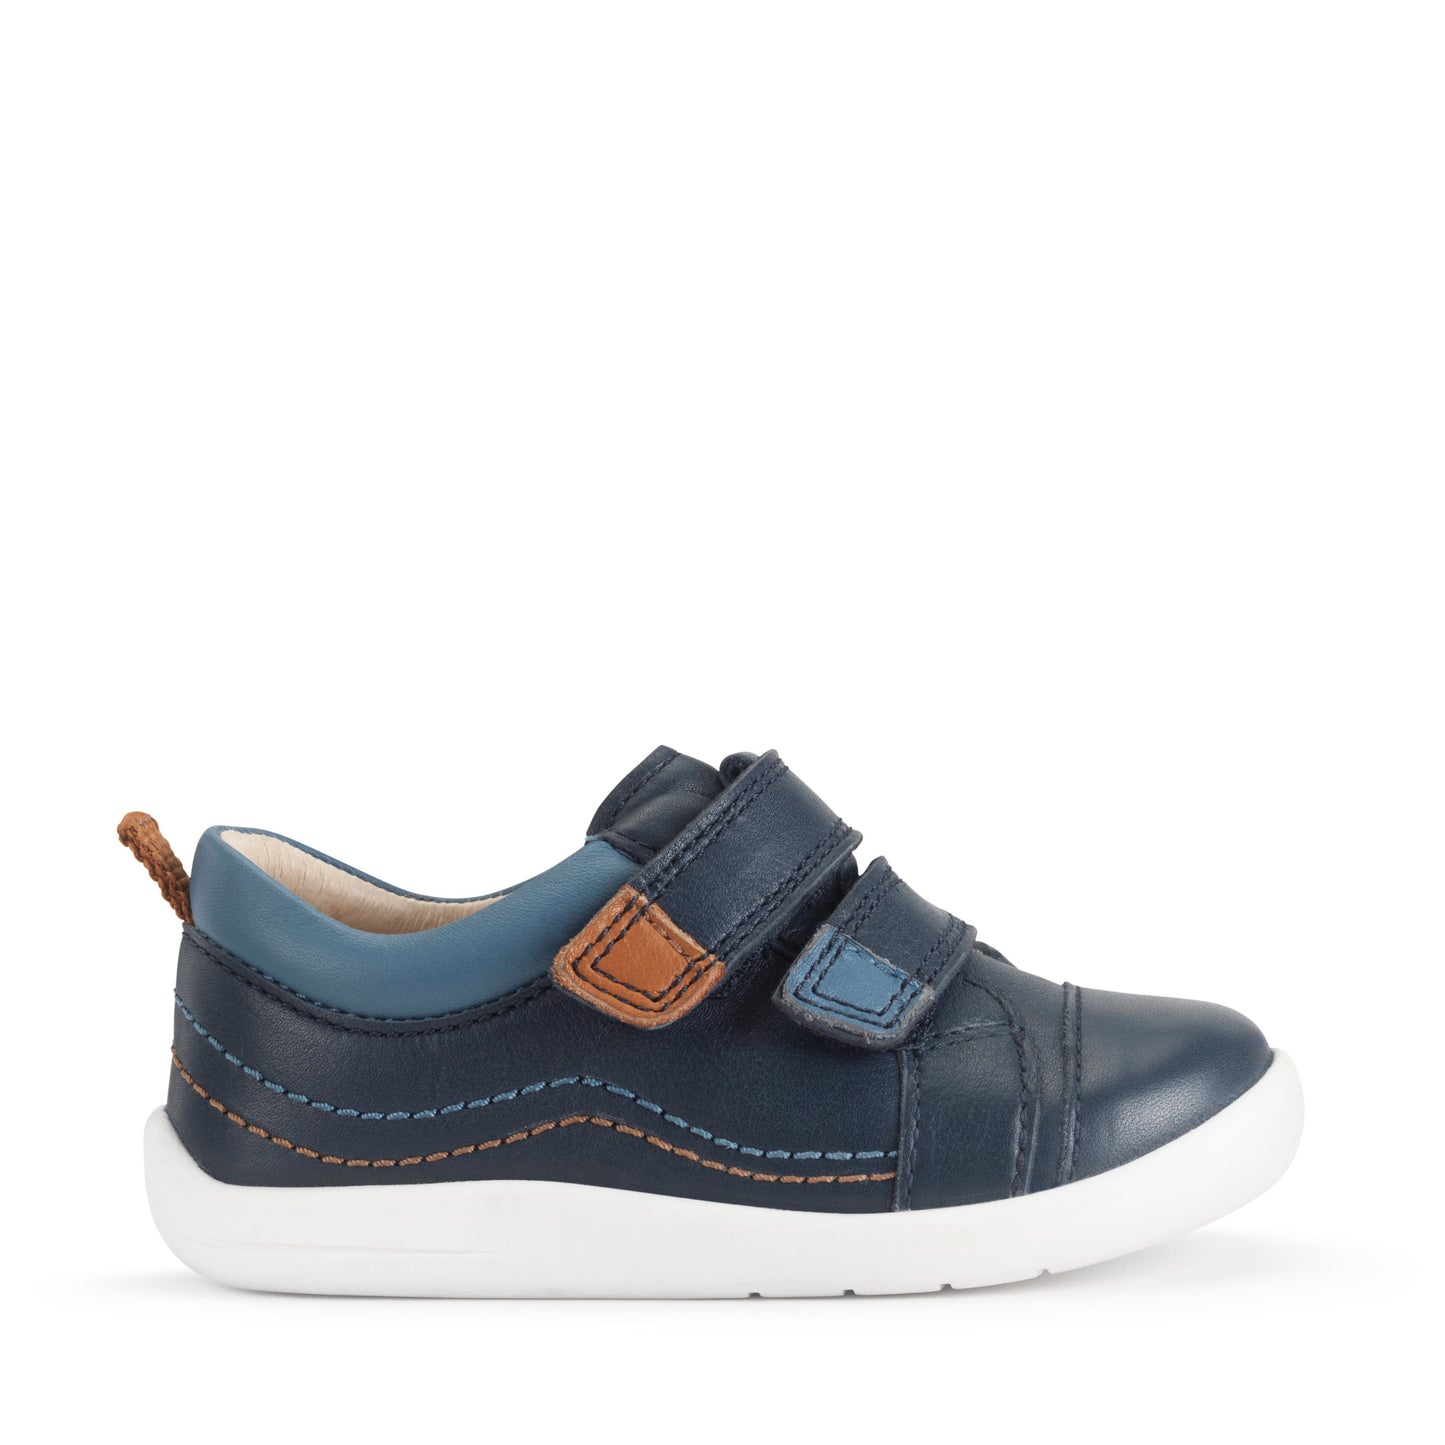 A boys shoe by Start-Rite, style Clubhouse, in navy leather with double velcro fastening. Right side view.